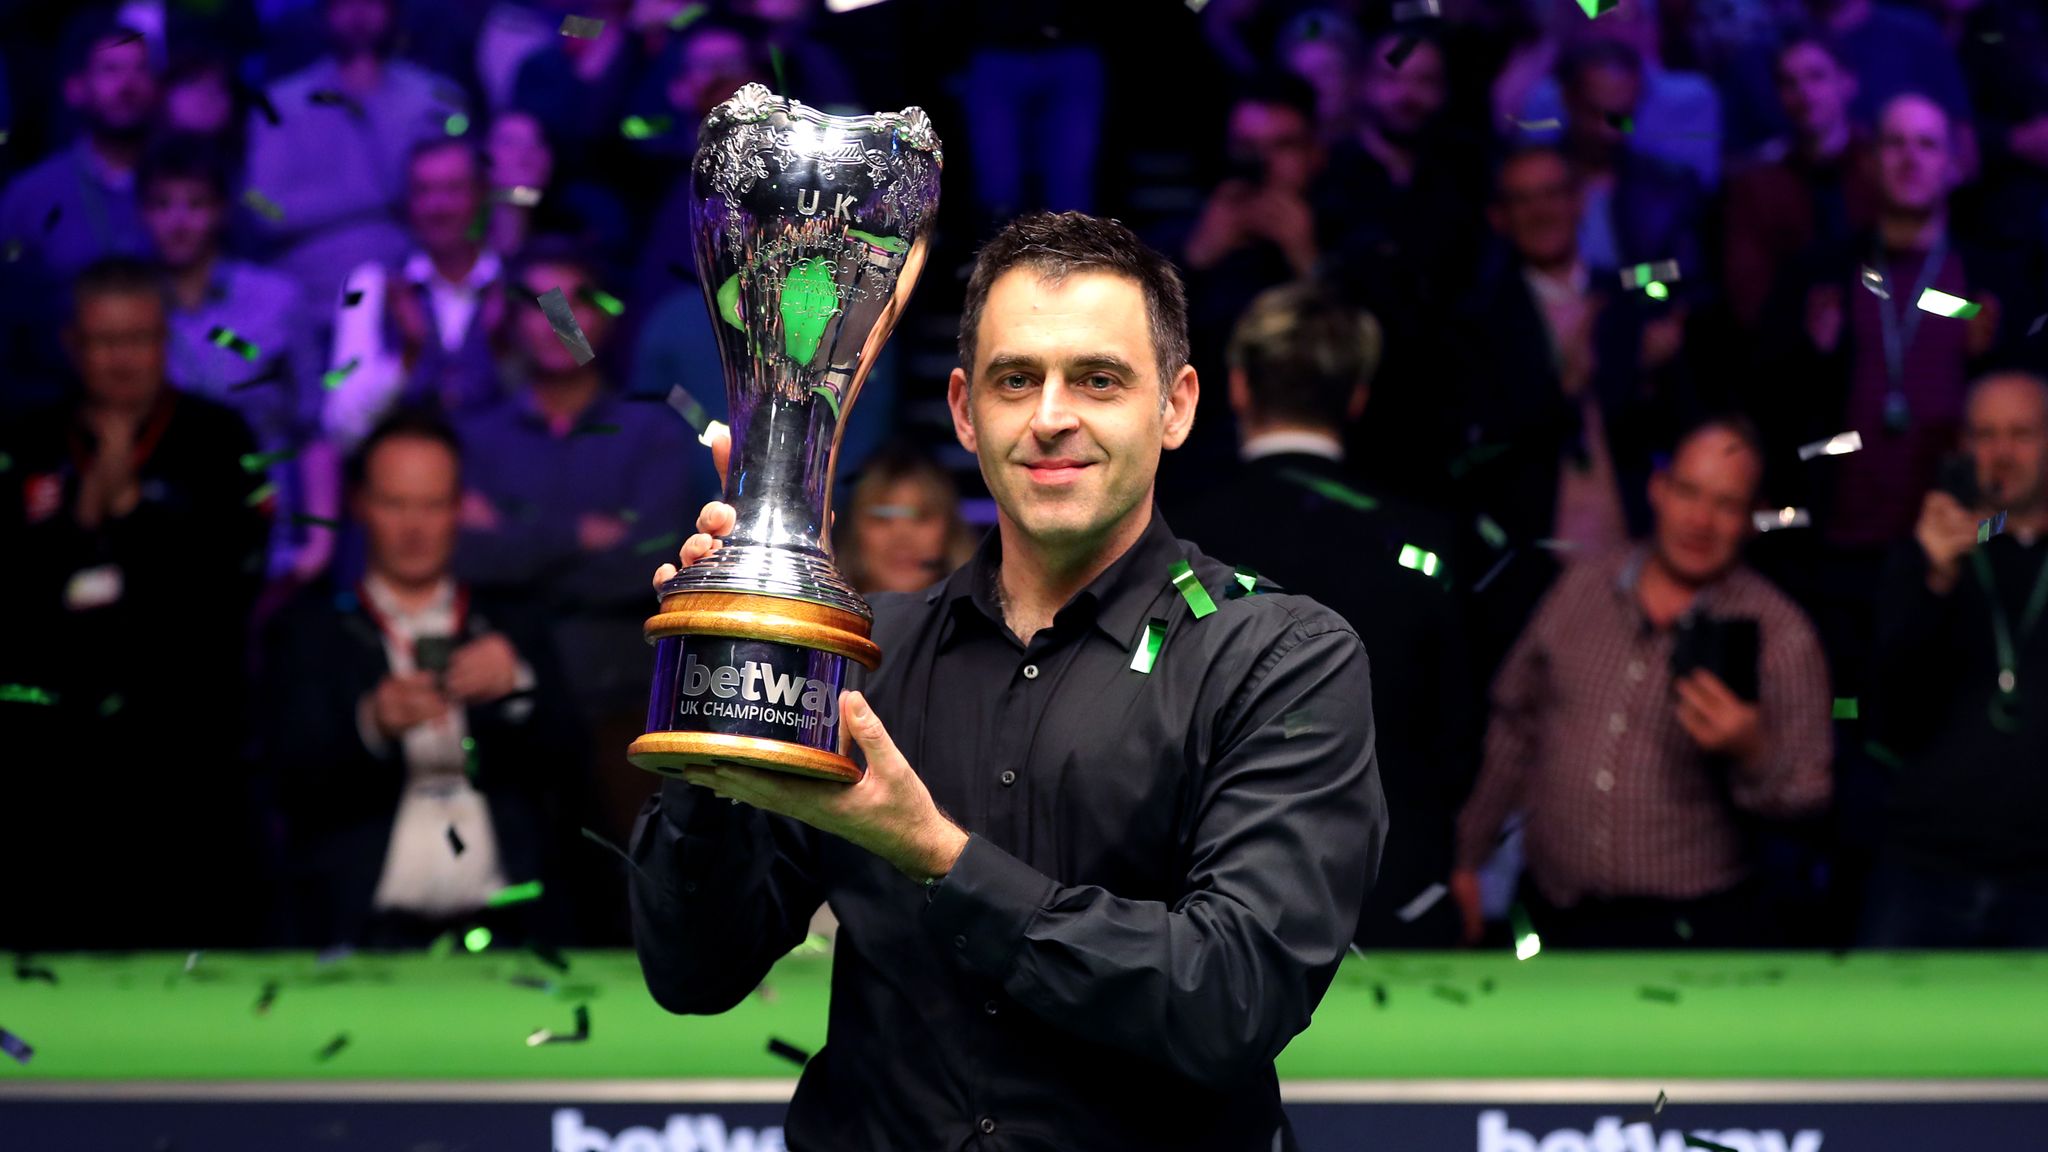 Ronnie O'Sullivan wins record seventh UK Championship crown after 10-6 win  over Joe Allen | Snooker News | Sky Sports